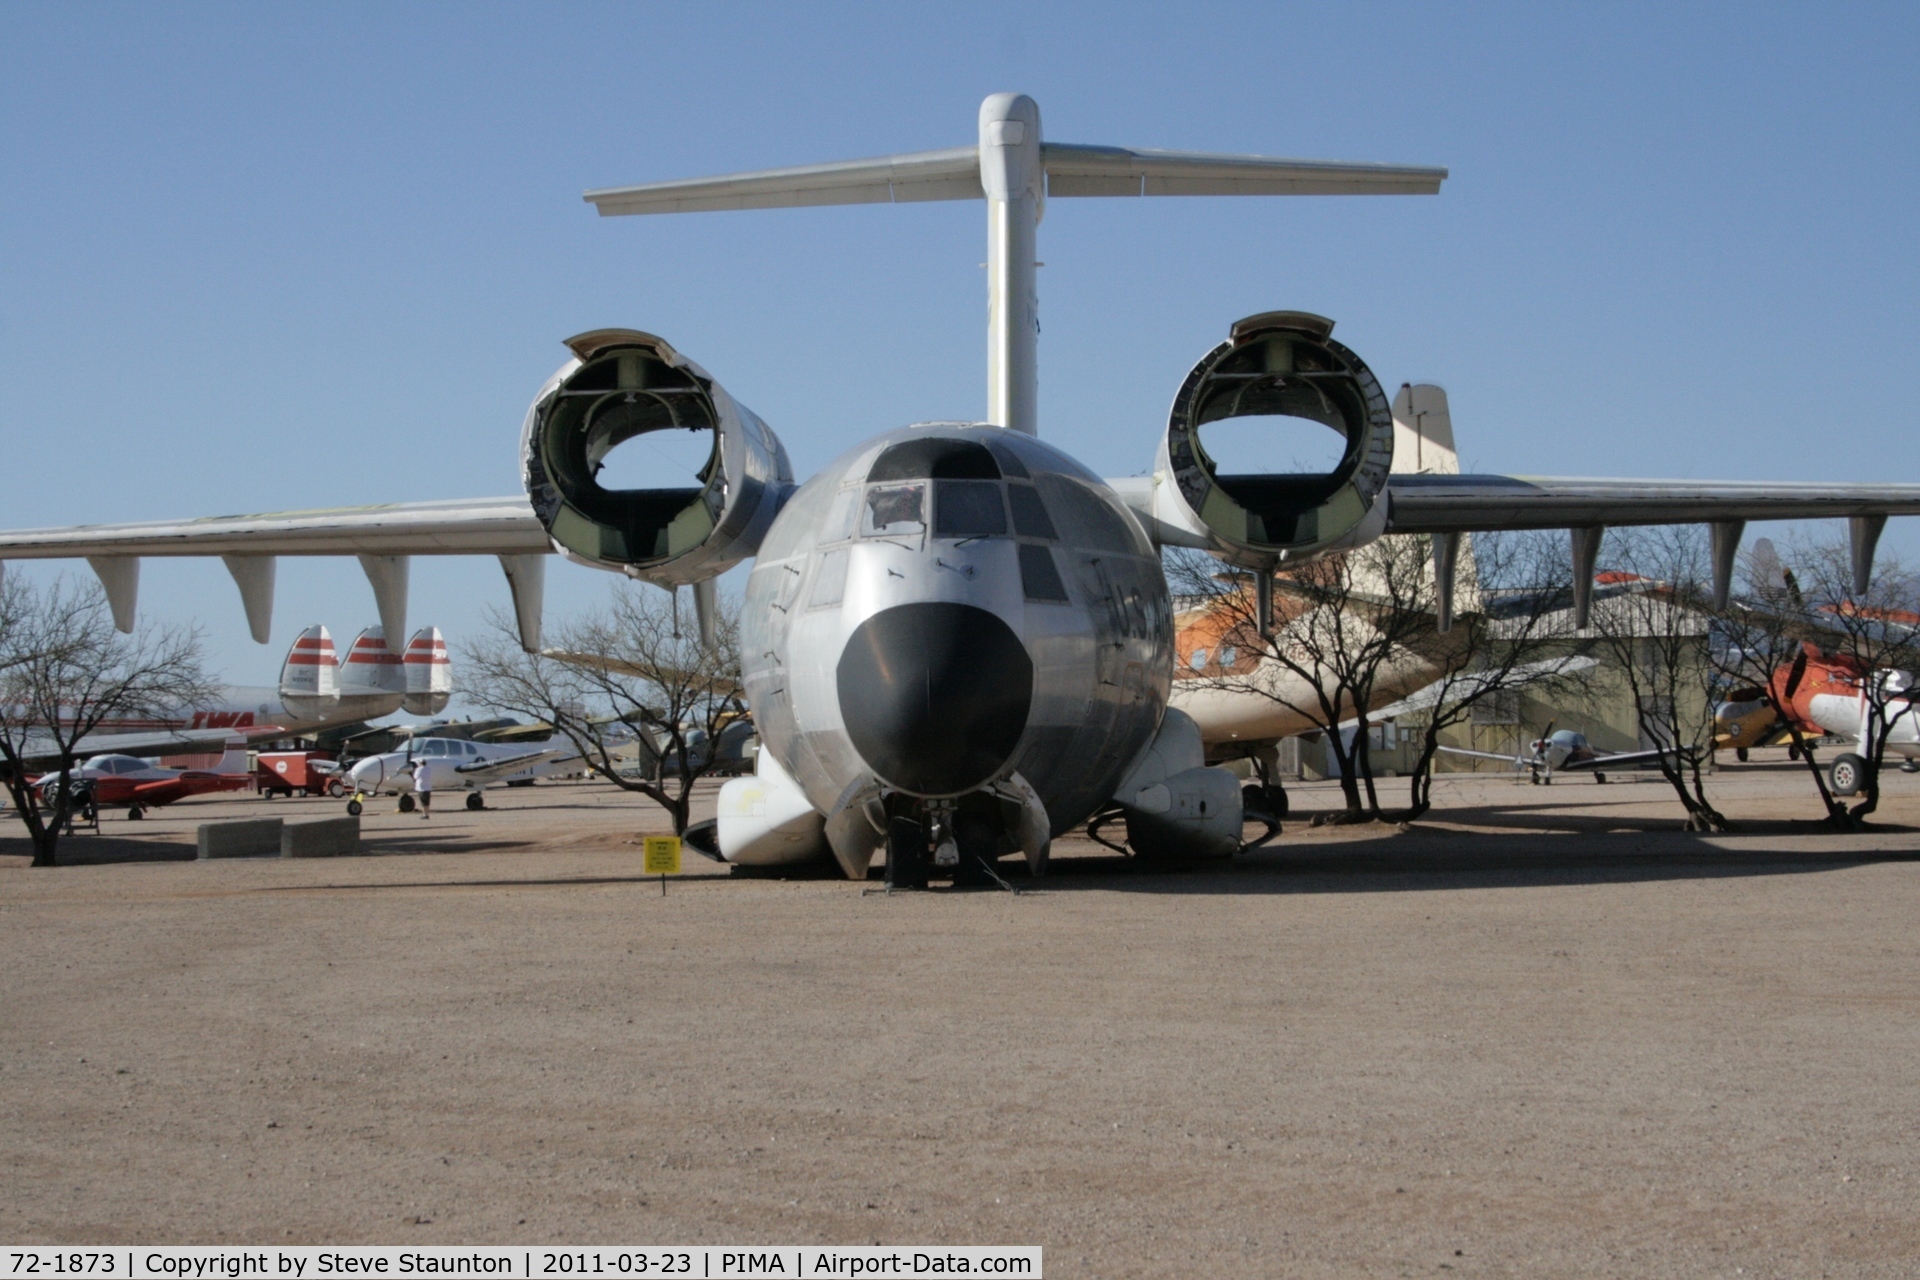 72-1873, 1972 Boeing YC-14A-BN C/N P 1, Taken at Pima Air and Space Museum, in March 2011 whilst on an Aeroprint Aviation tour